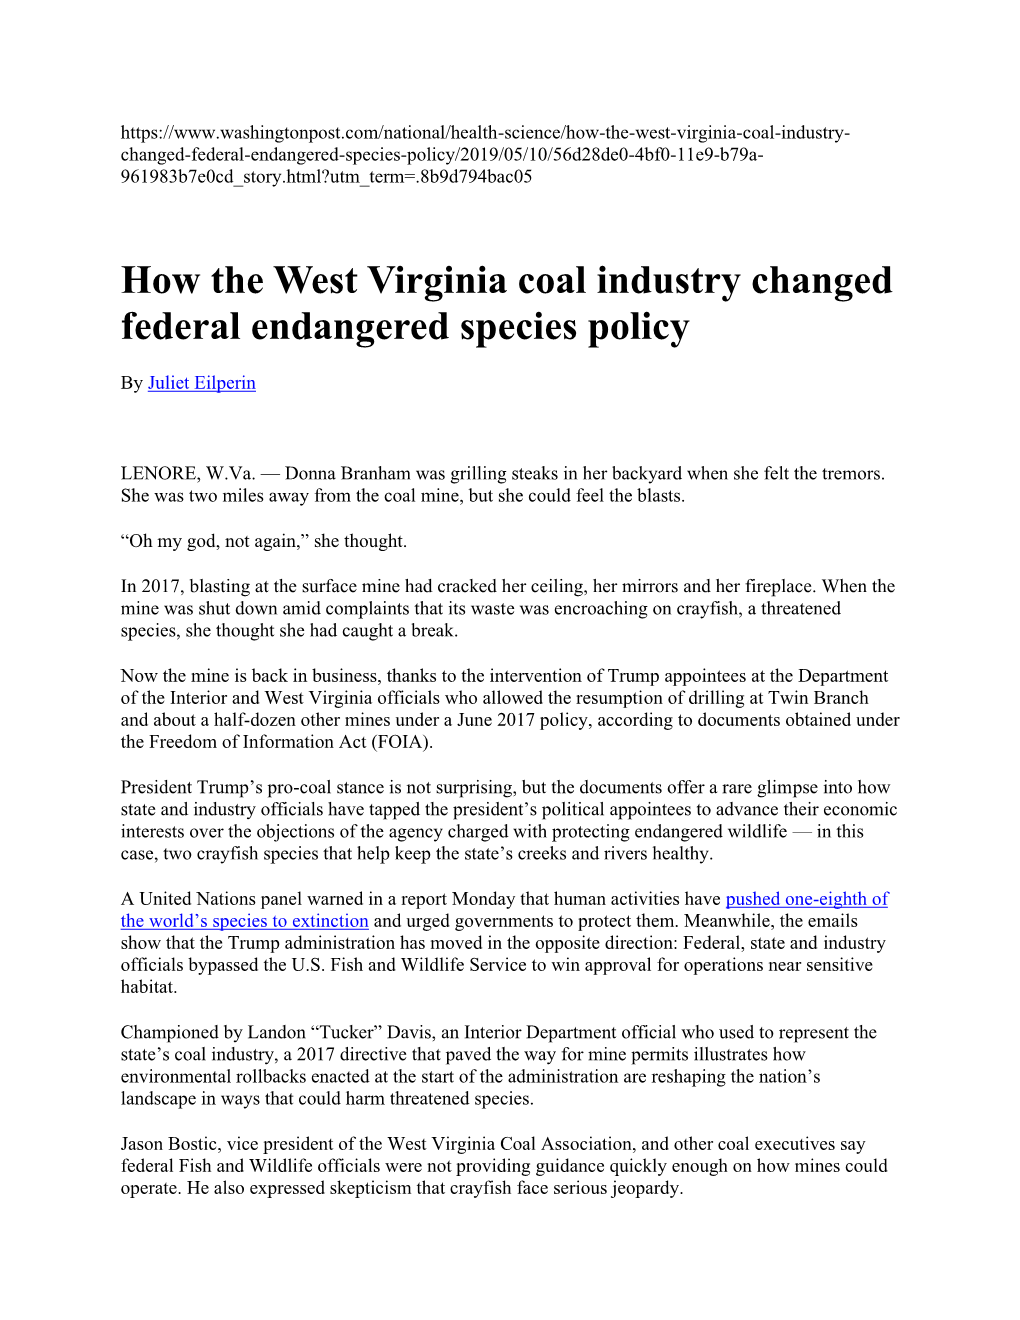 How the West Virginia Coal Industry Changed Federal Endangered Species Policy